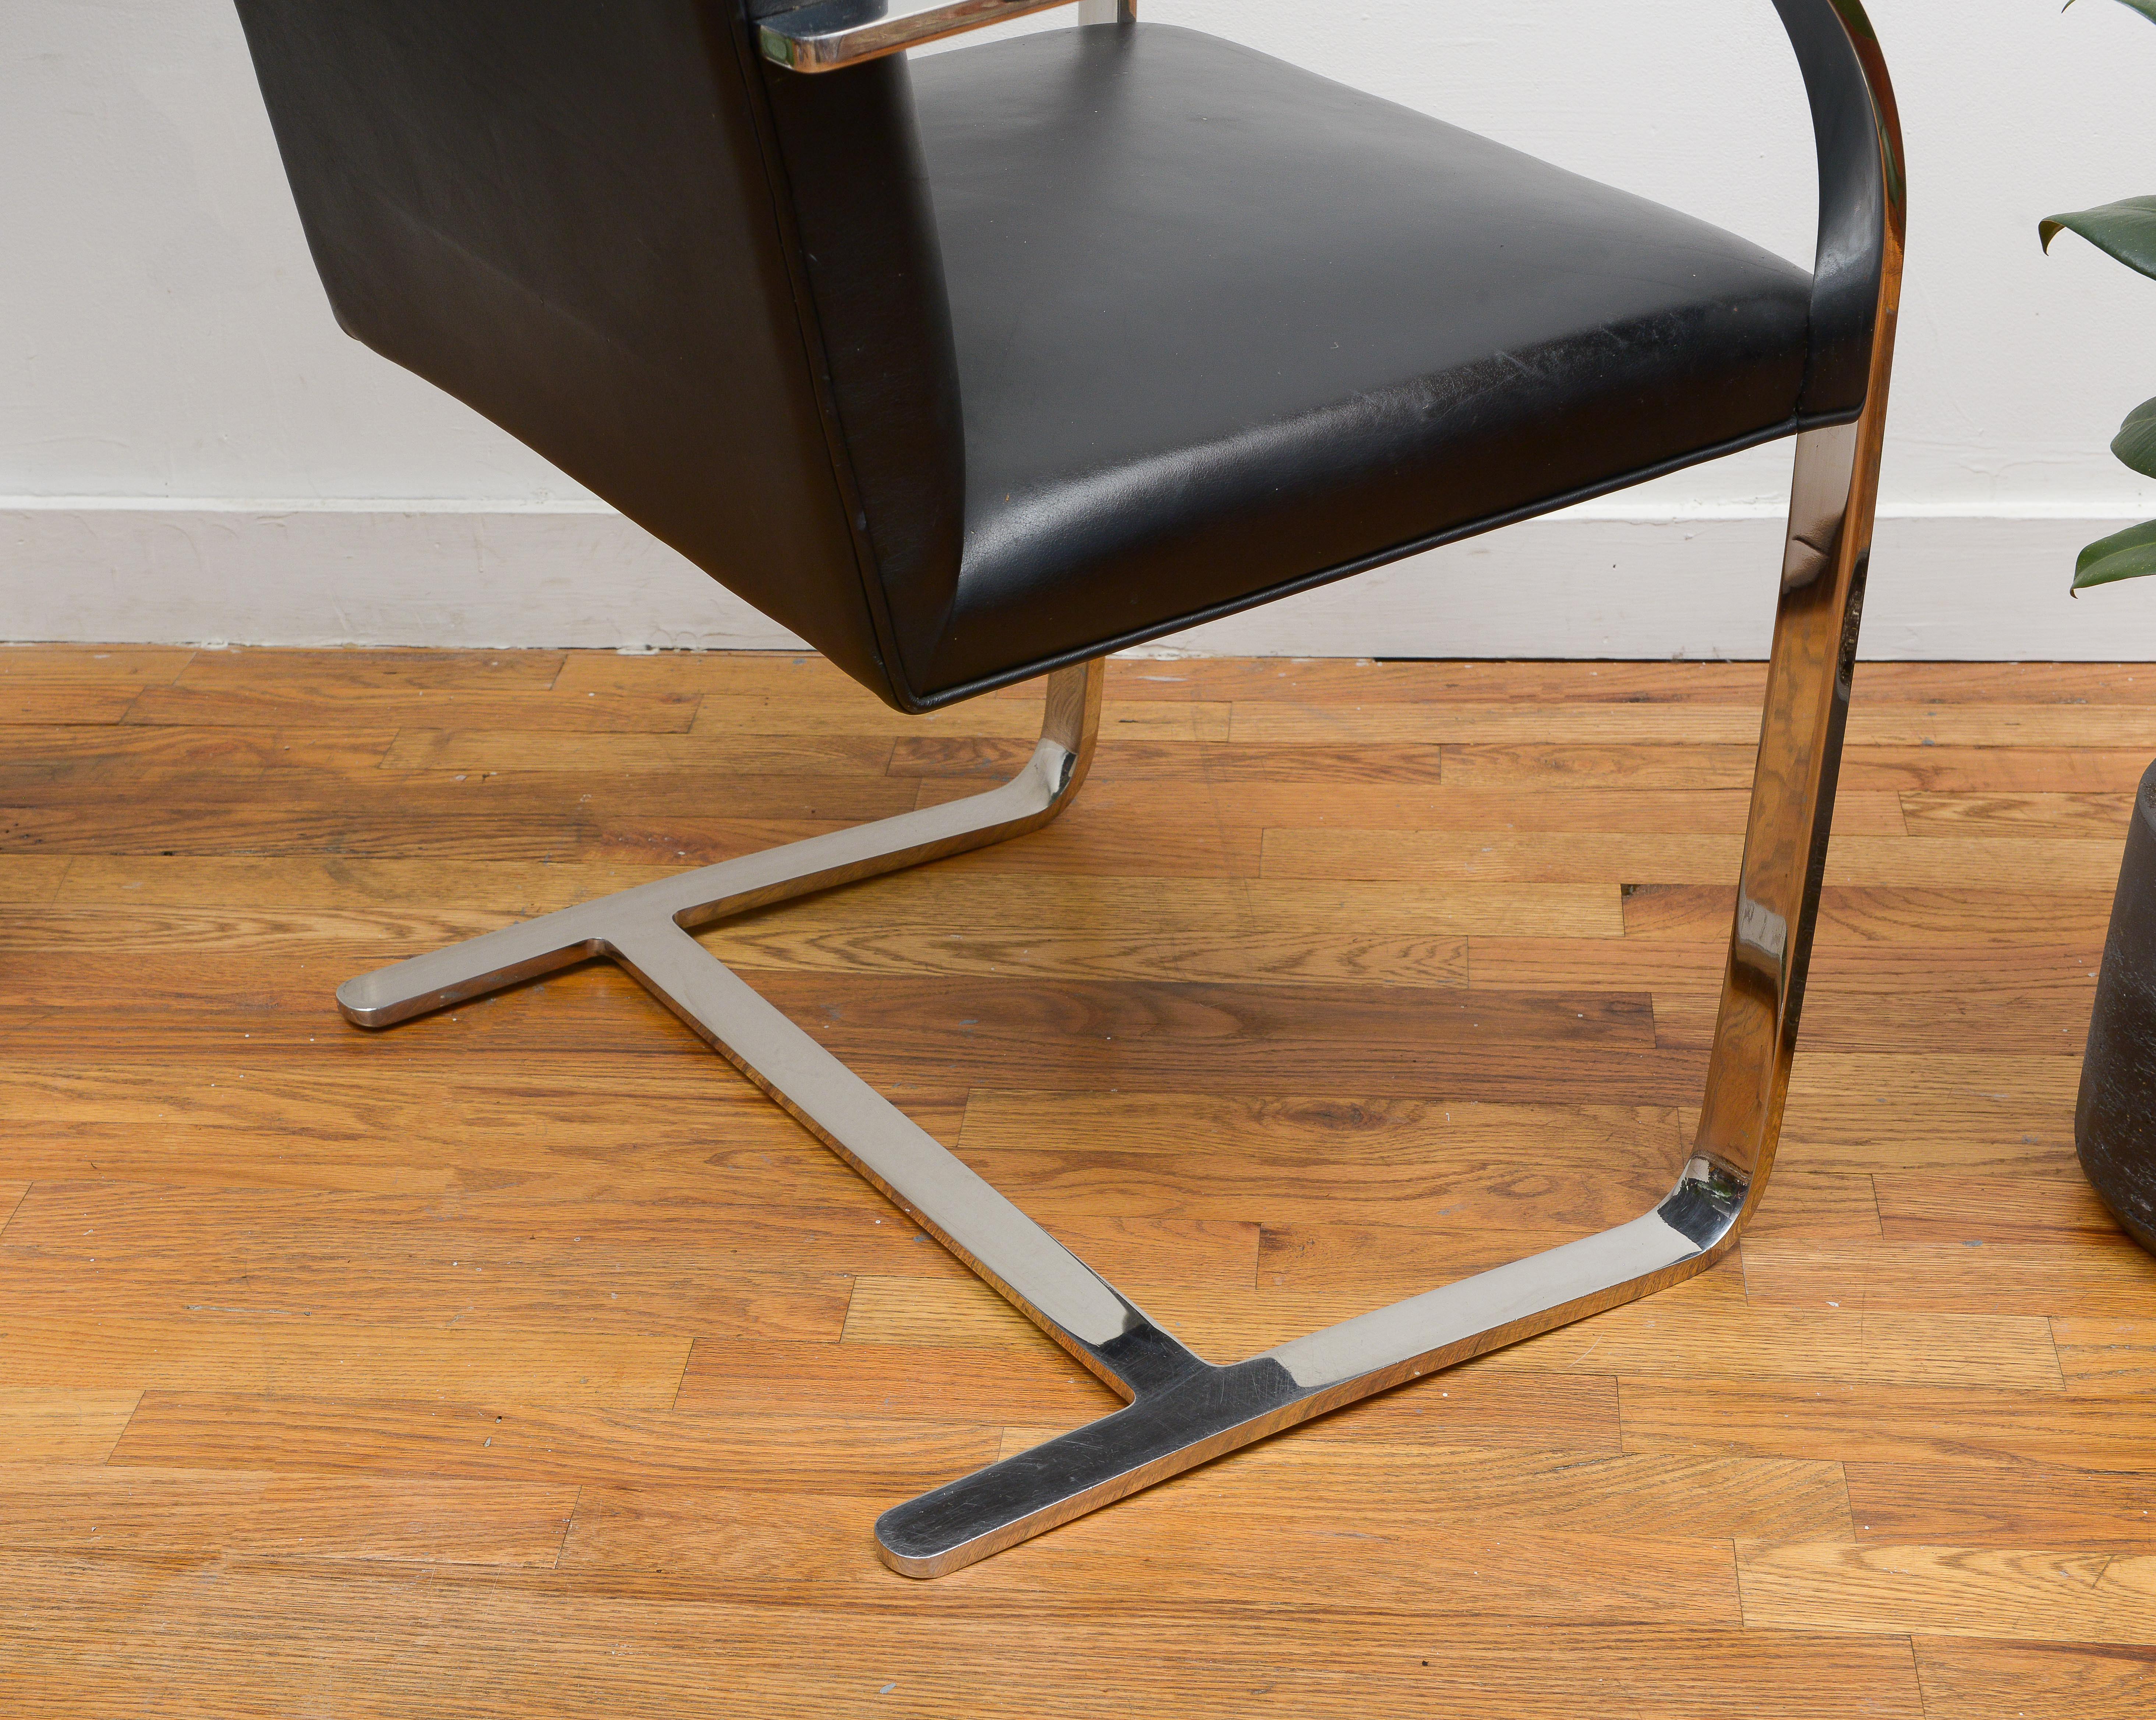 Late 20th Century Iconic Mies van der Rohe BRNO Flat Bar Chair in Black Leather, 1990s For Sale